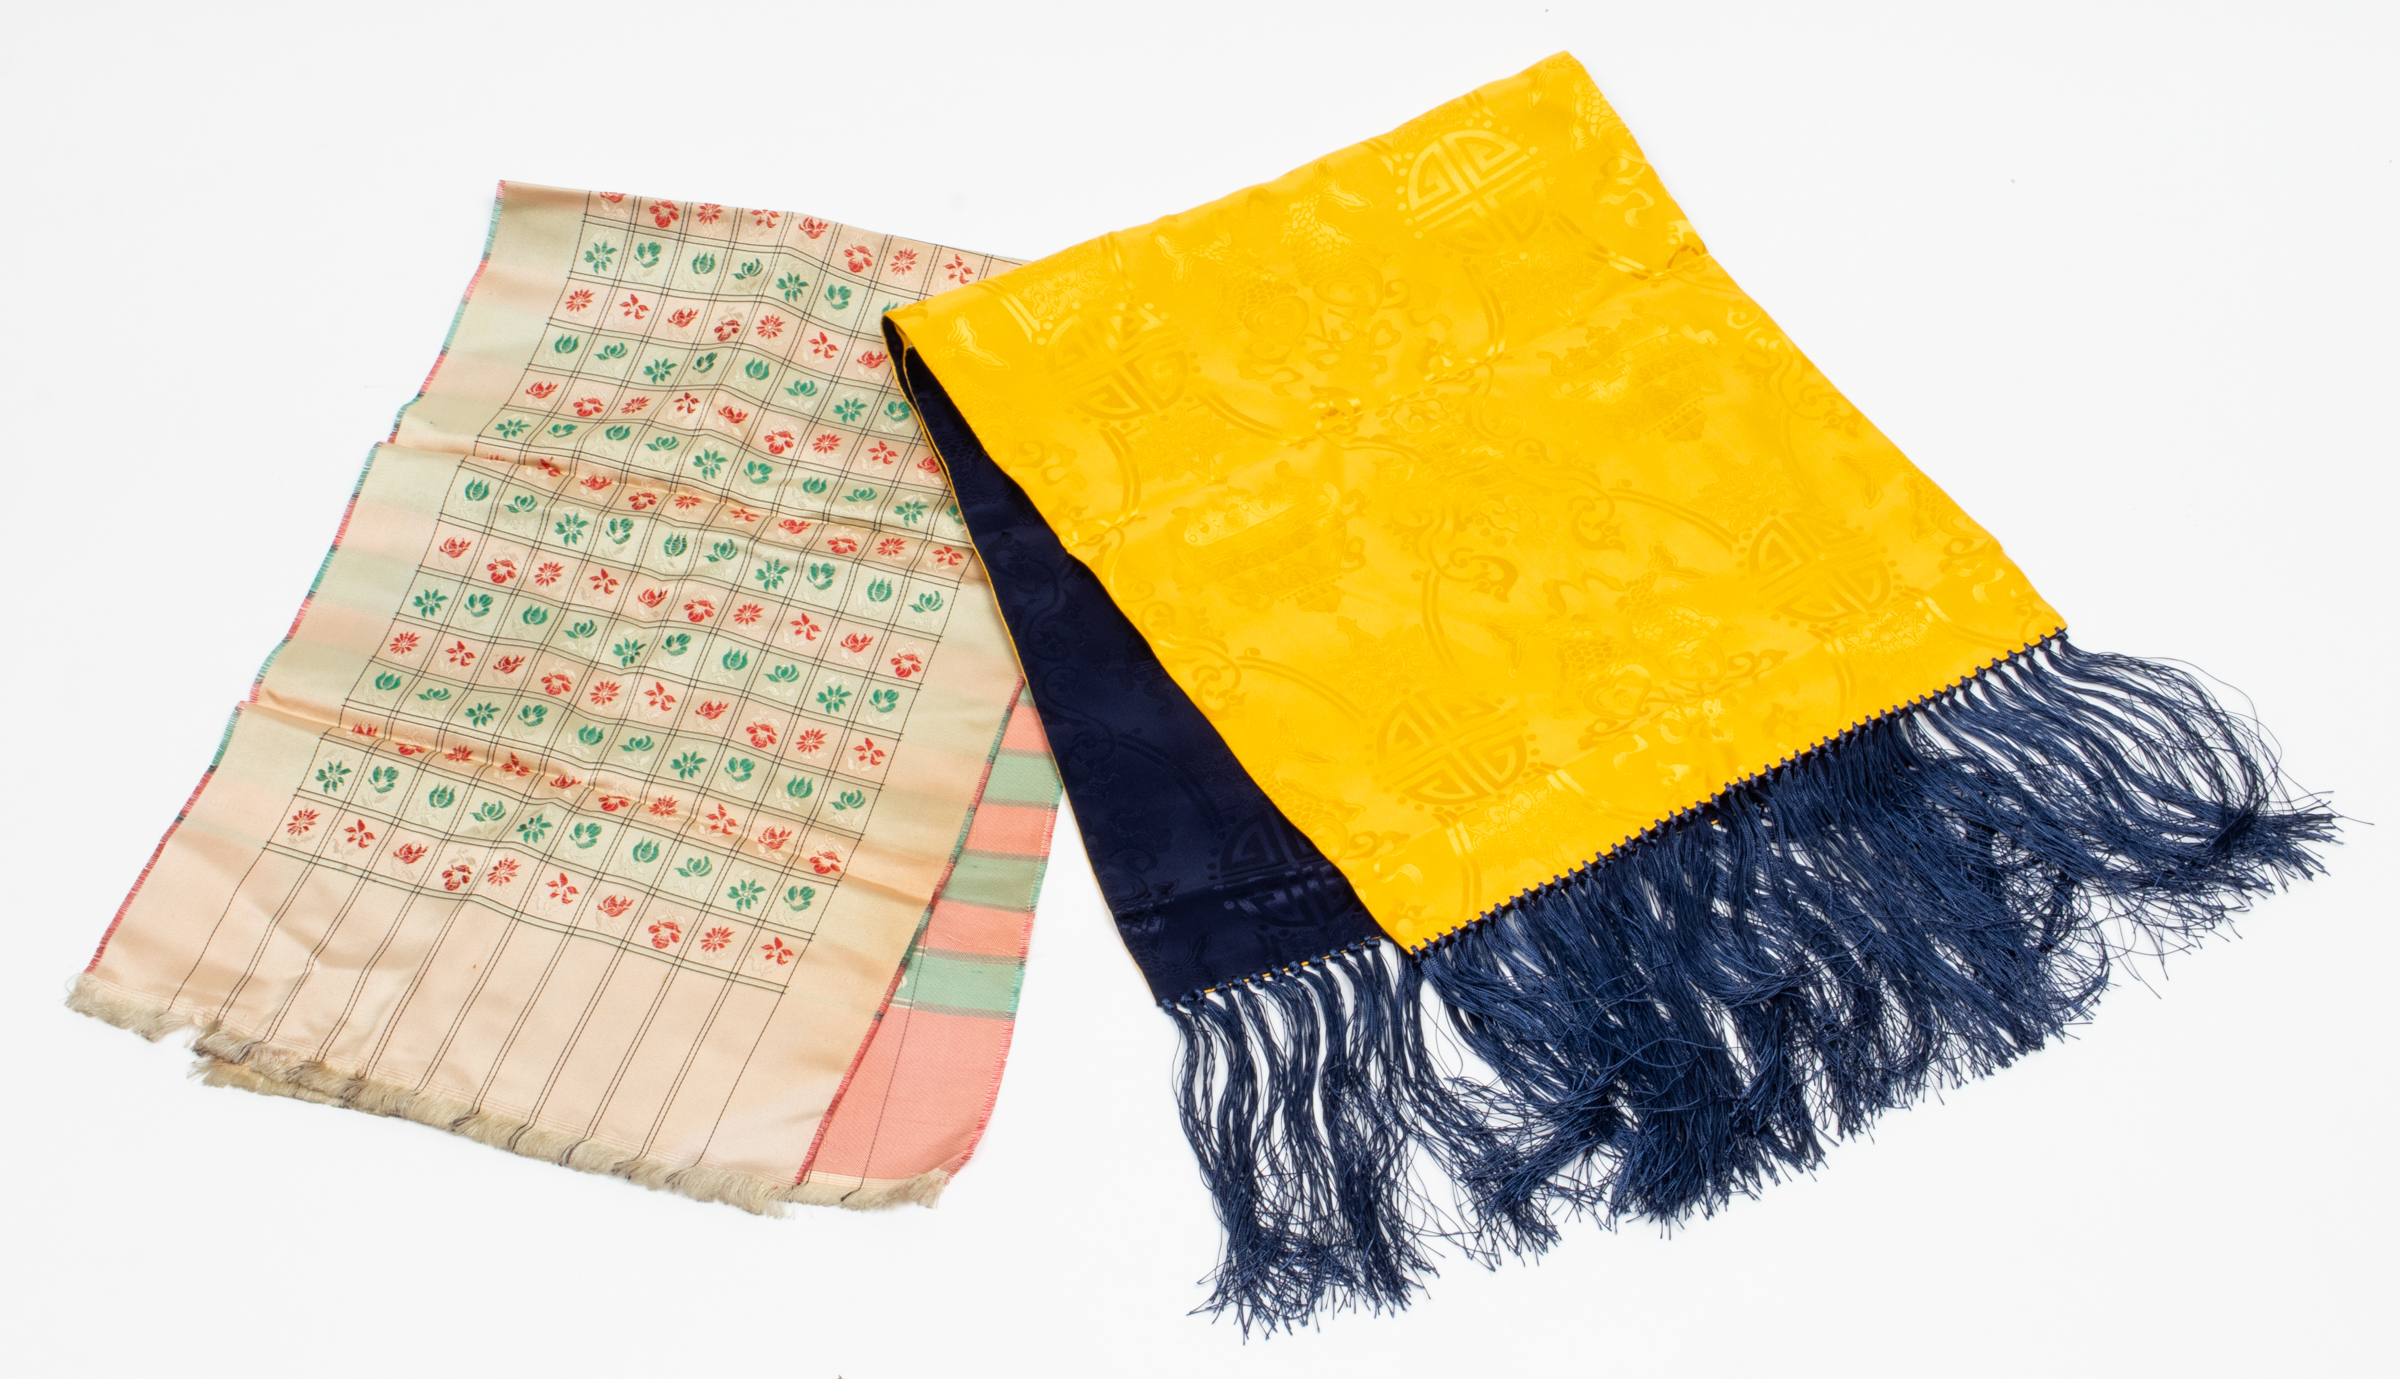 SILK SCARVES, 2 PCS. Gold and blue